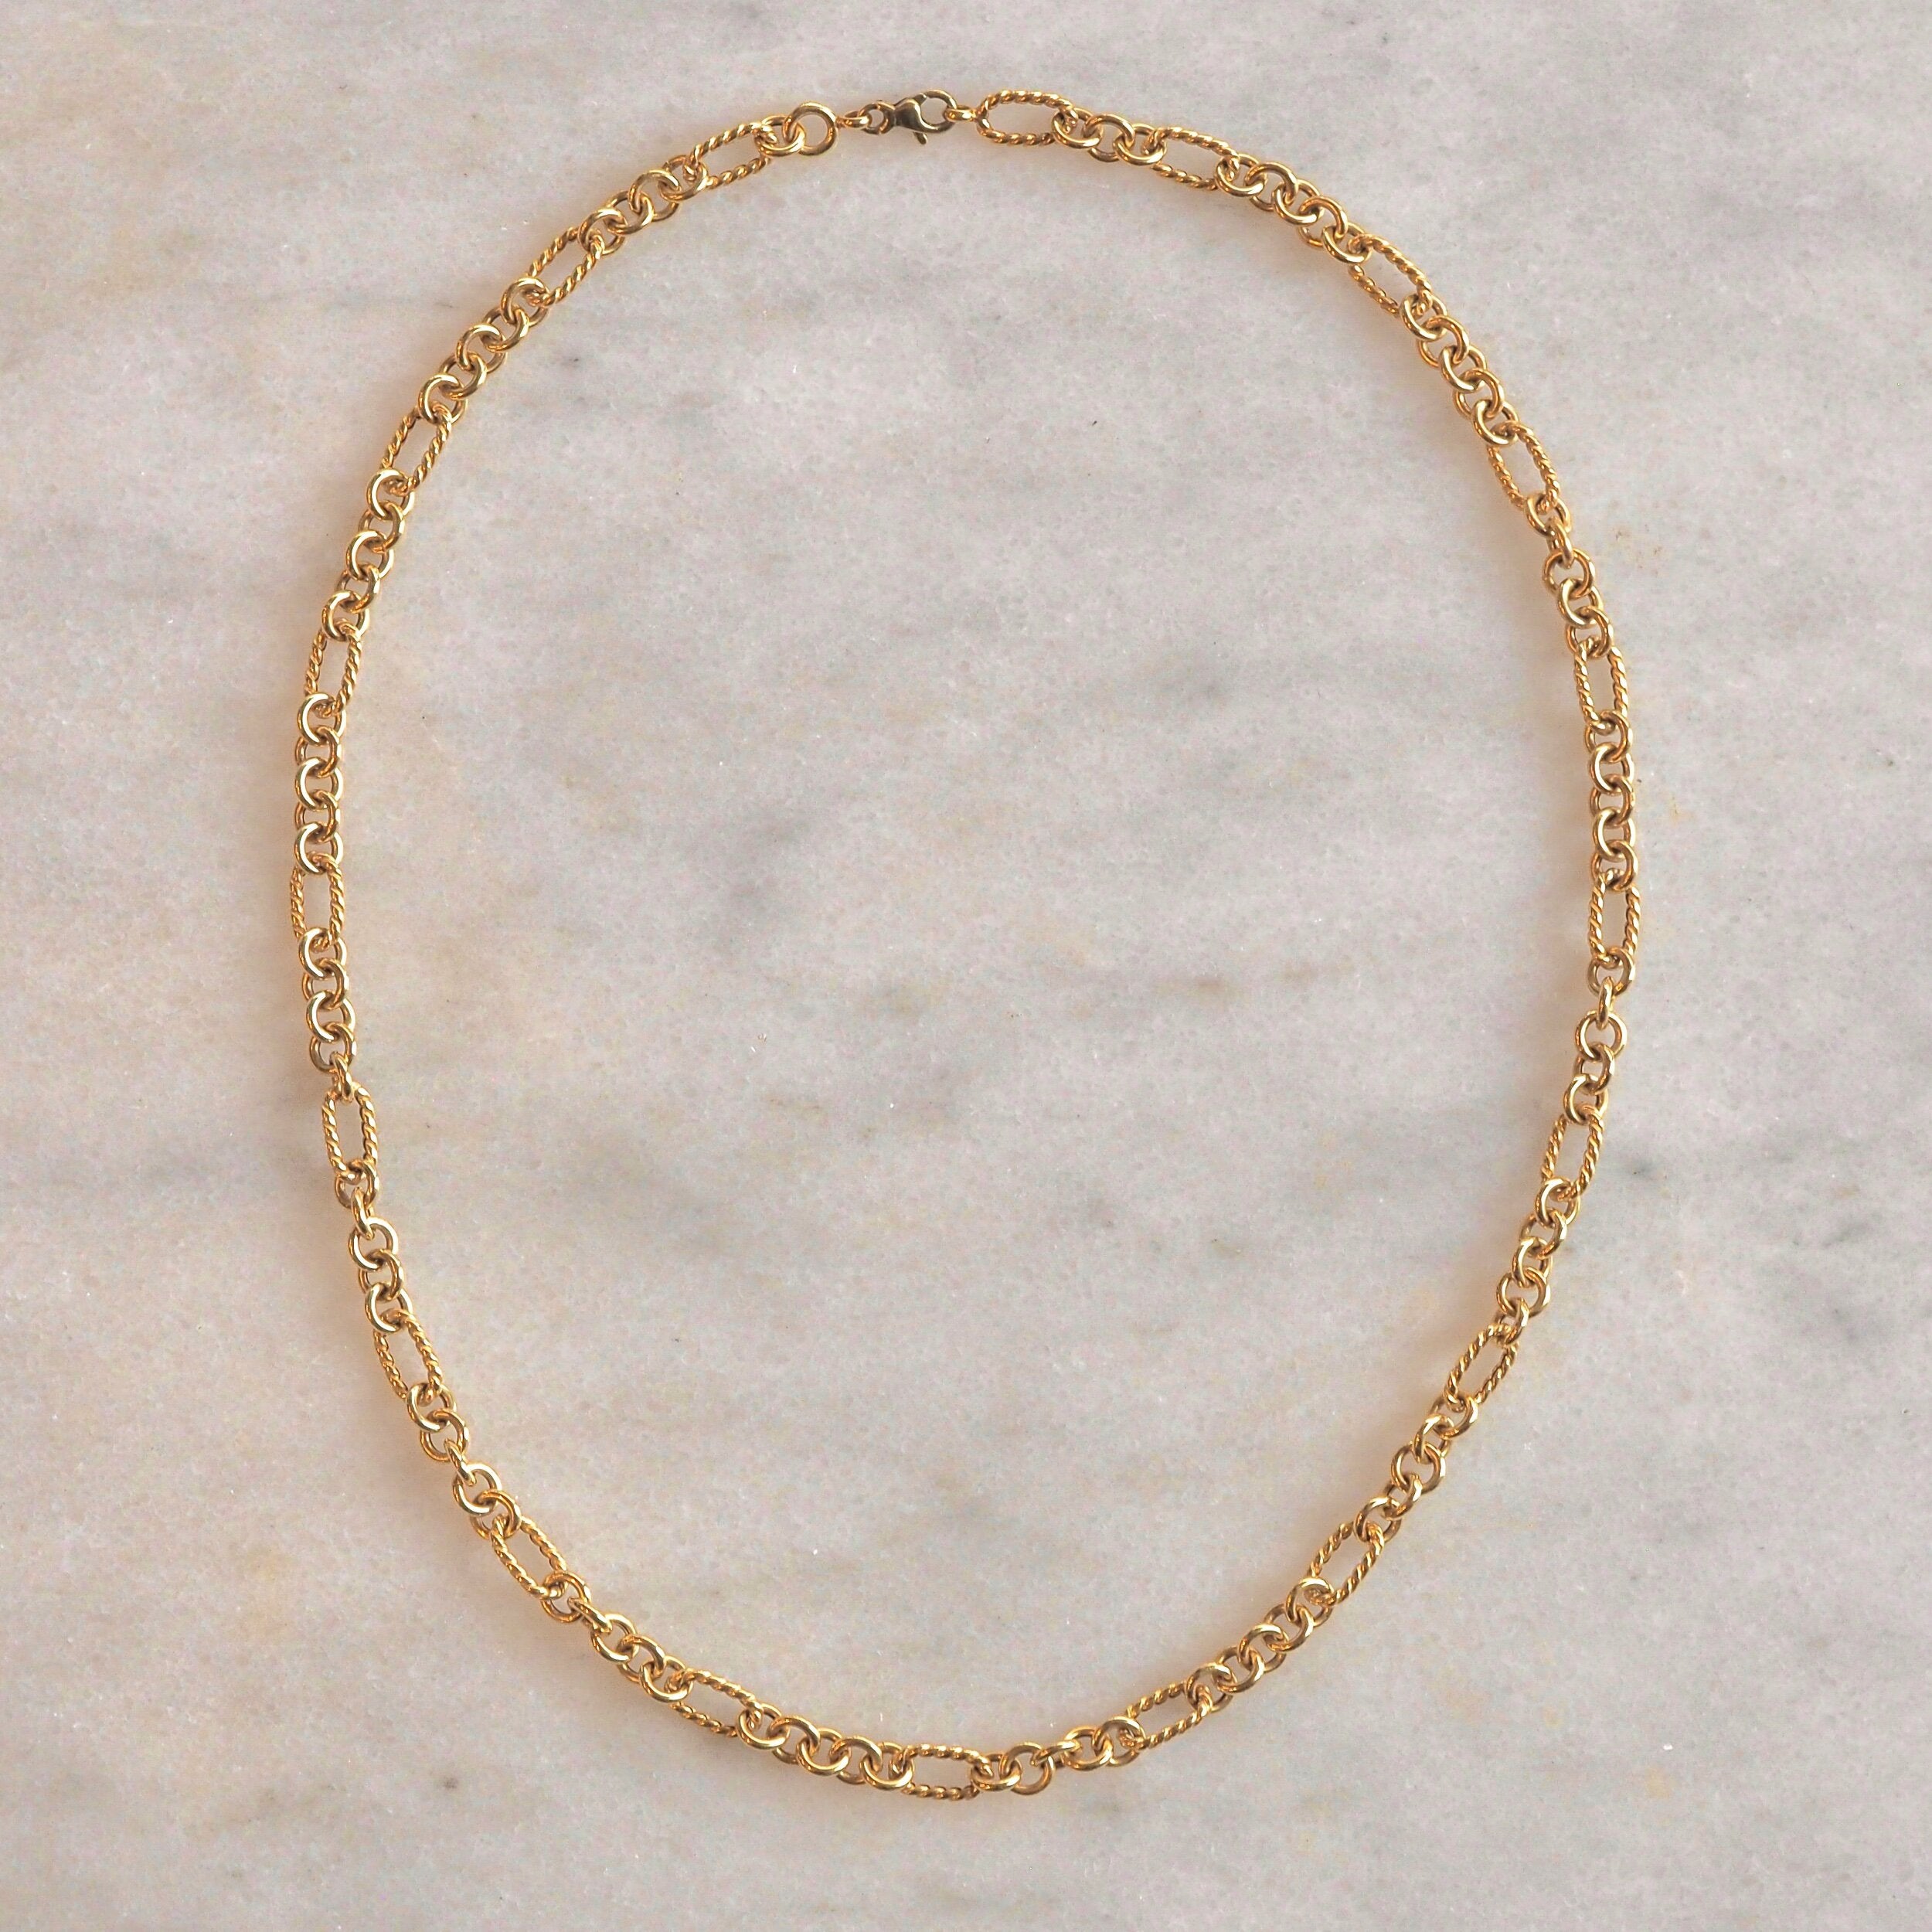 Vintage Italian 14k Gold Textured Oval and Round Rolo Link Chain Necklace